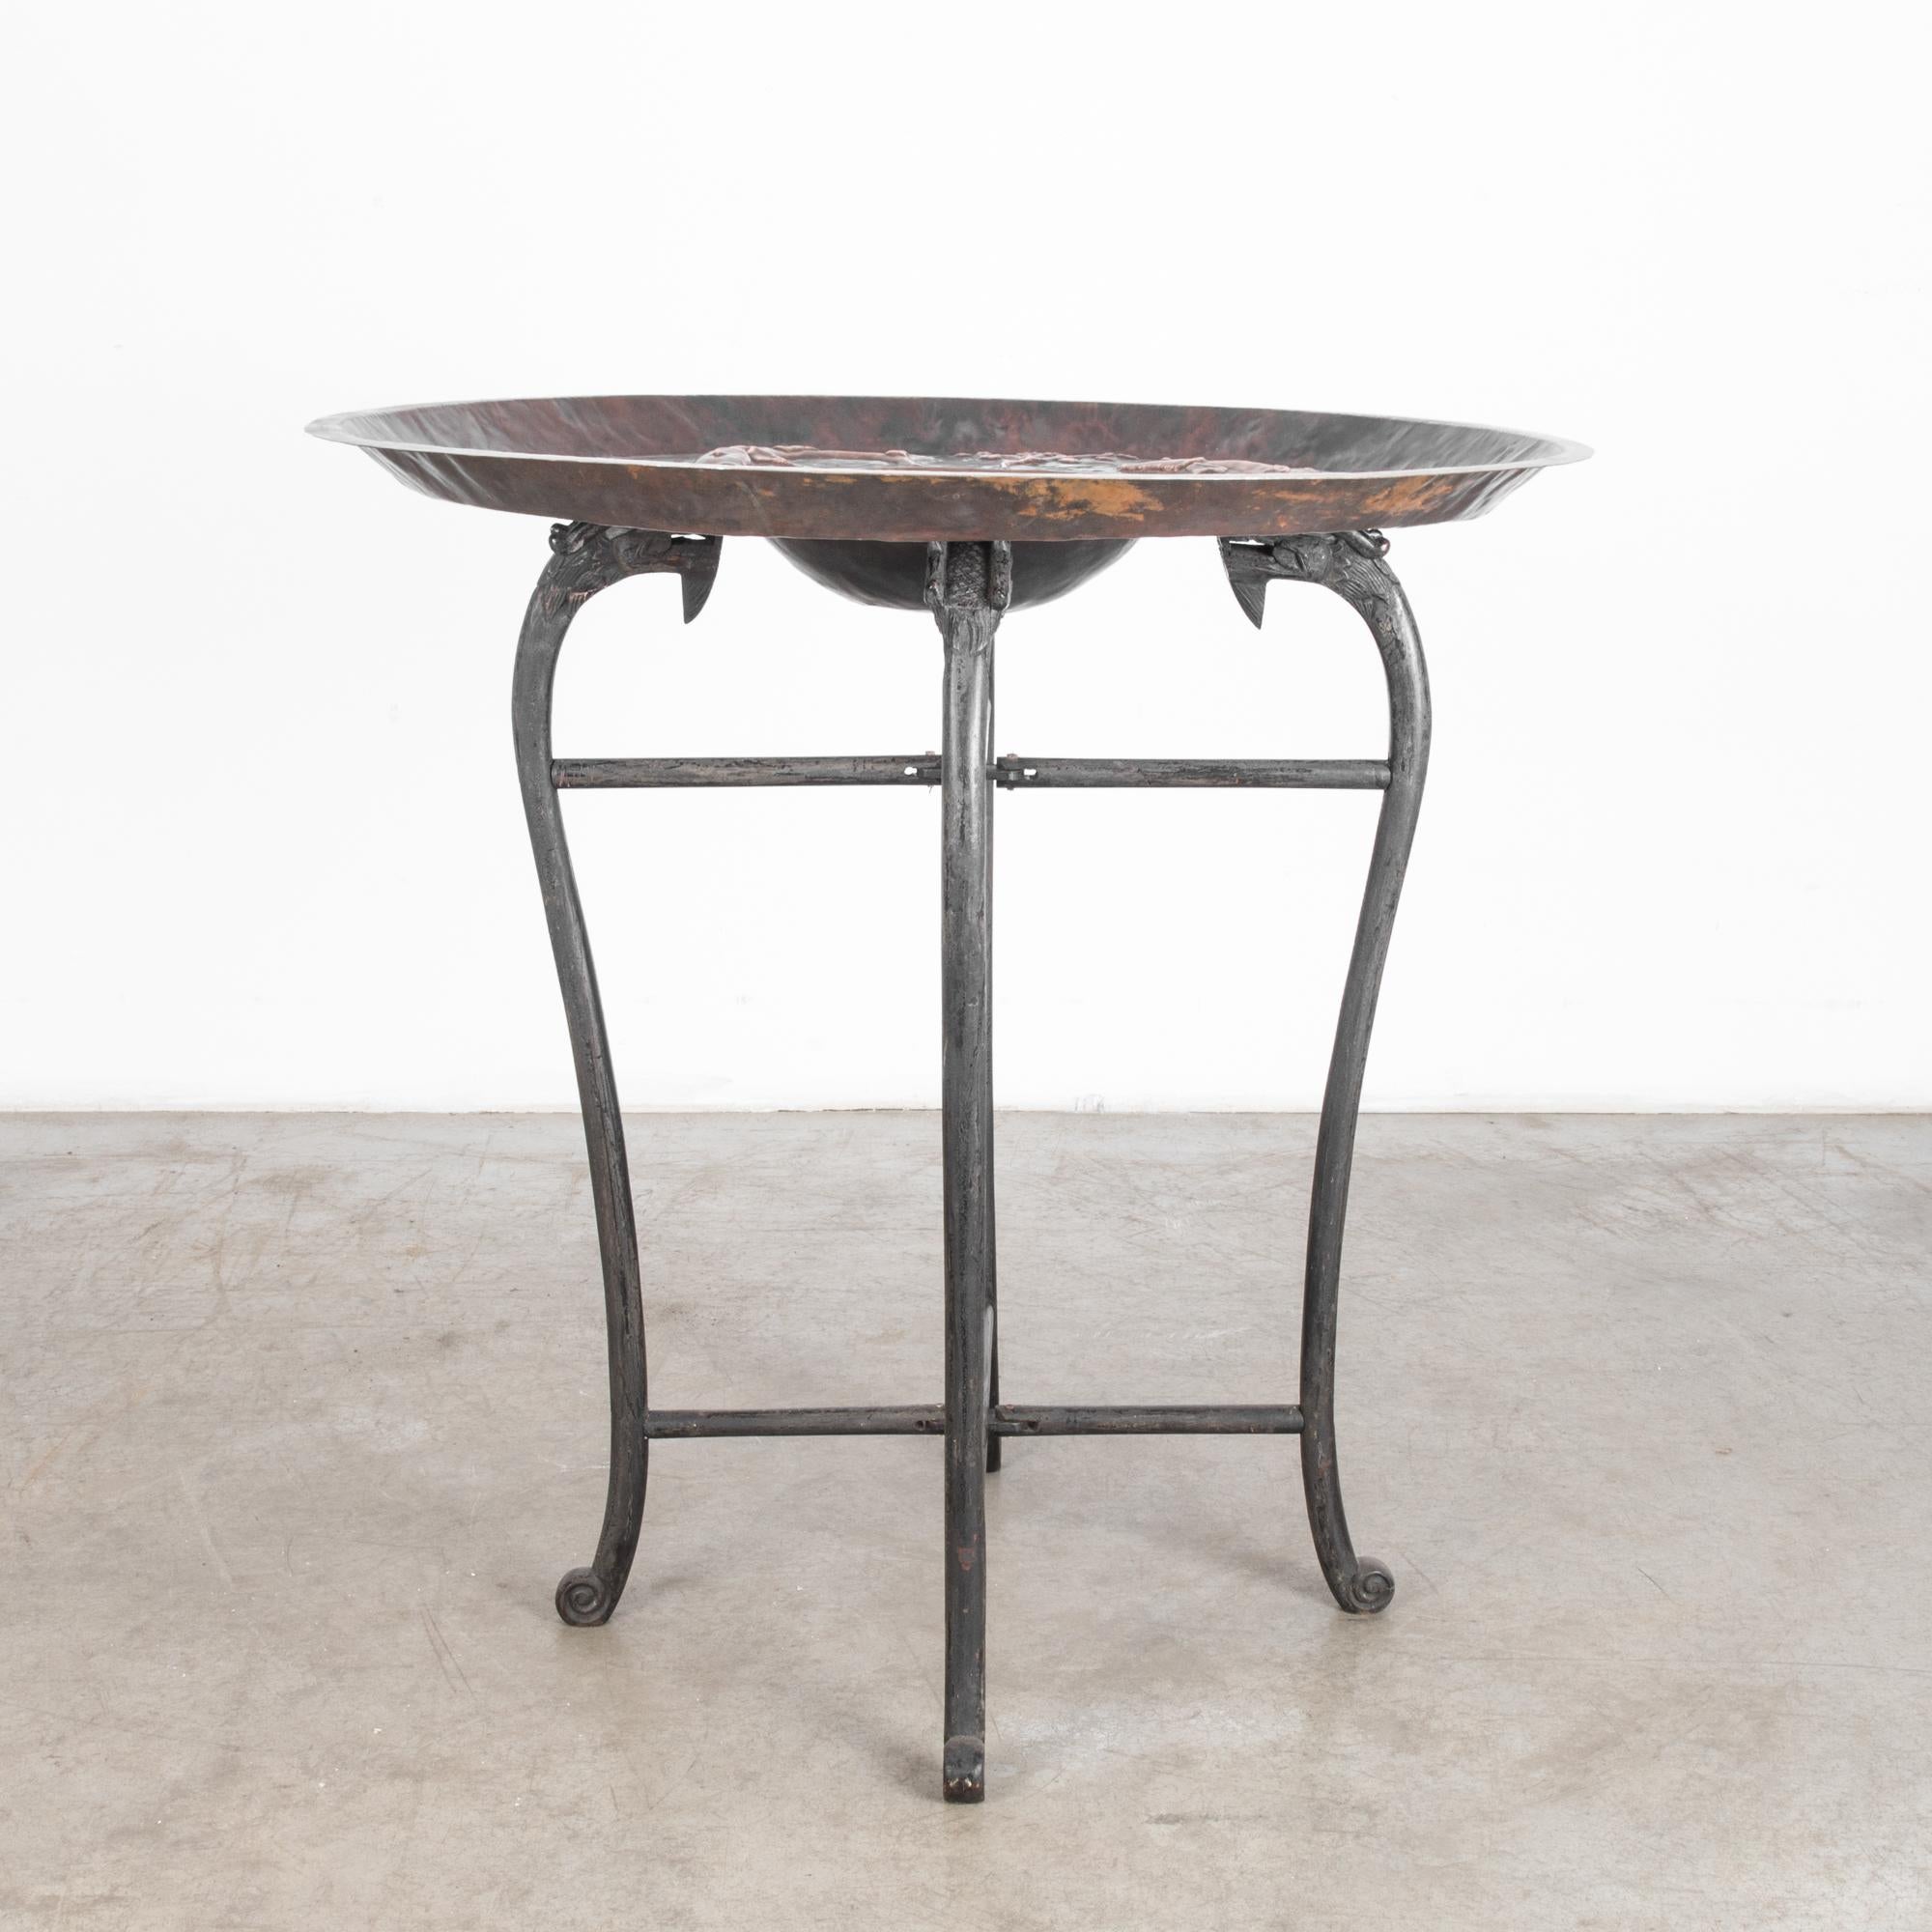 This table is composed of a deep copper tray which rests upon a carved, folding wooden stand. Made in India, circa 1900, both tray and stand feature elaborate decorative elements. The slender, curving legs of the stand, finished in a dark, burnished